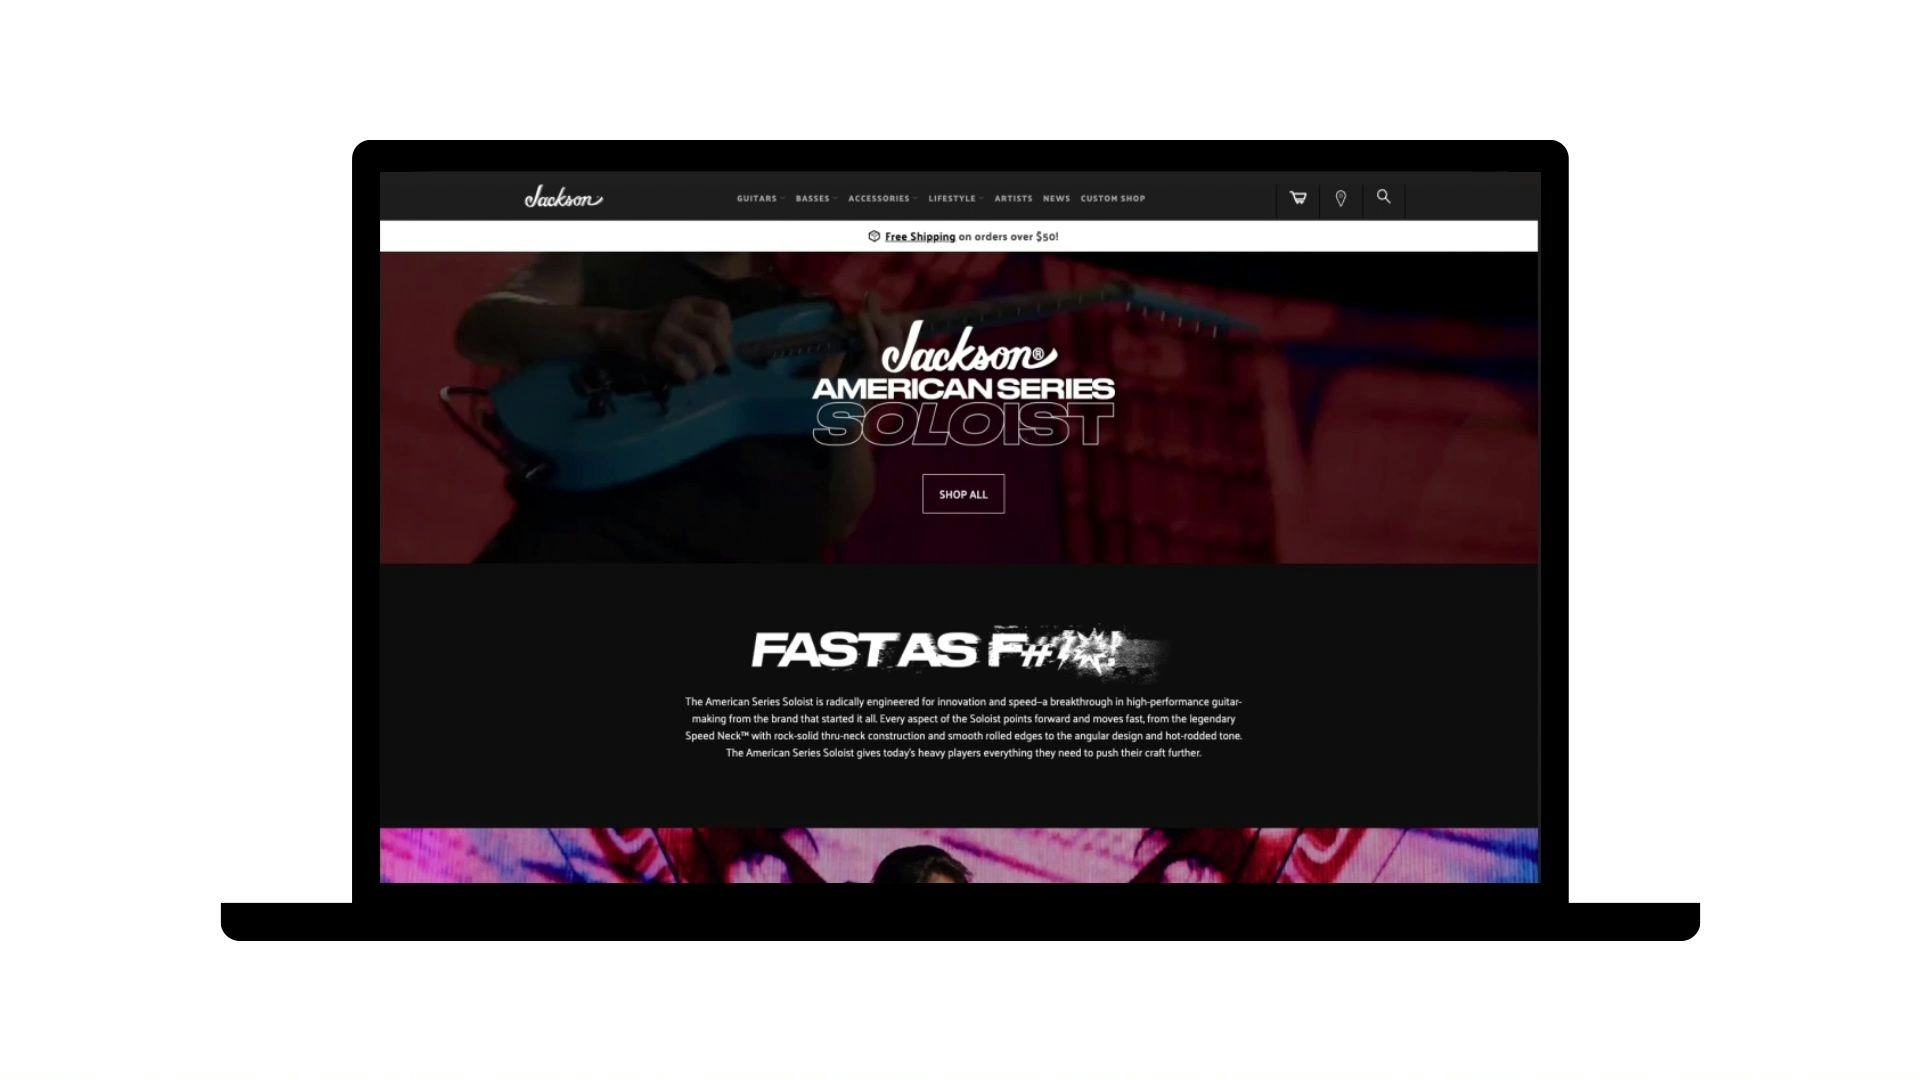 Jackson American Series Soloist campaign marketing landing page scroll through on a desktop device